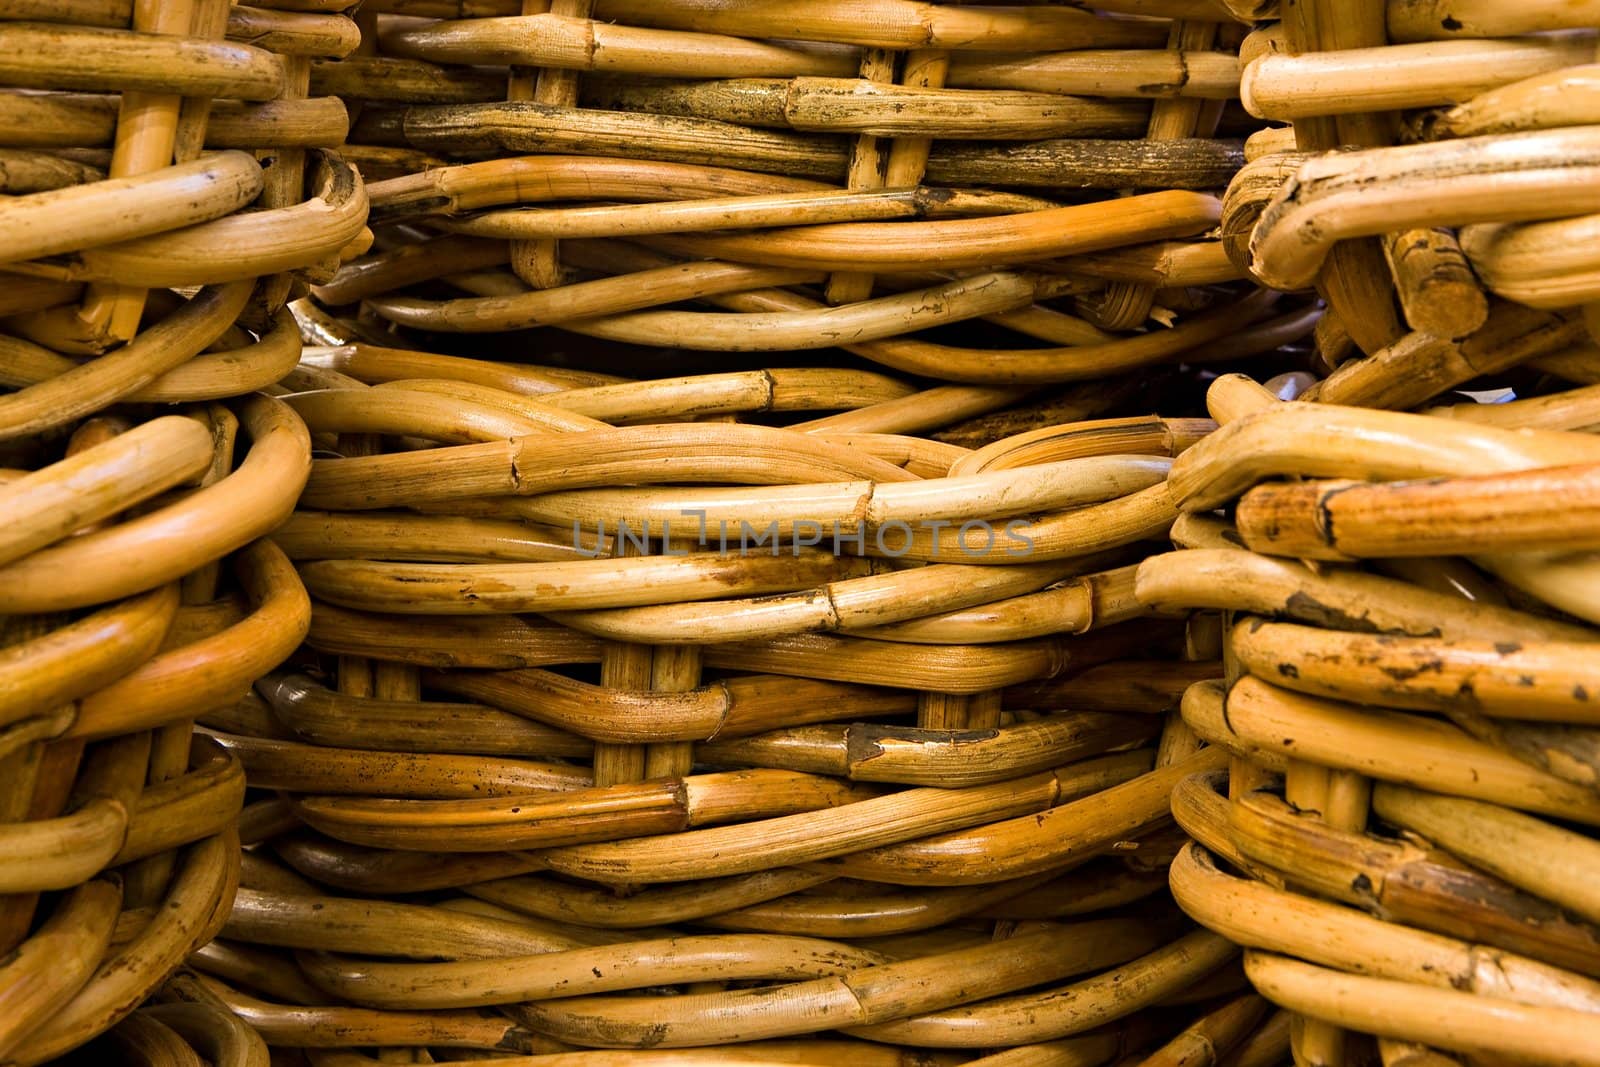 The baskets roughly weaved from willow rods close up
